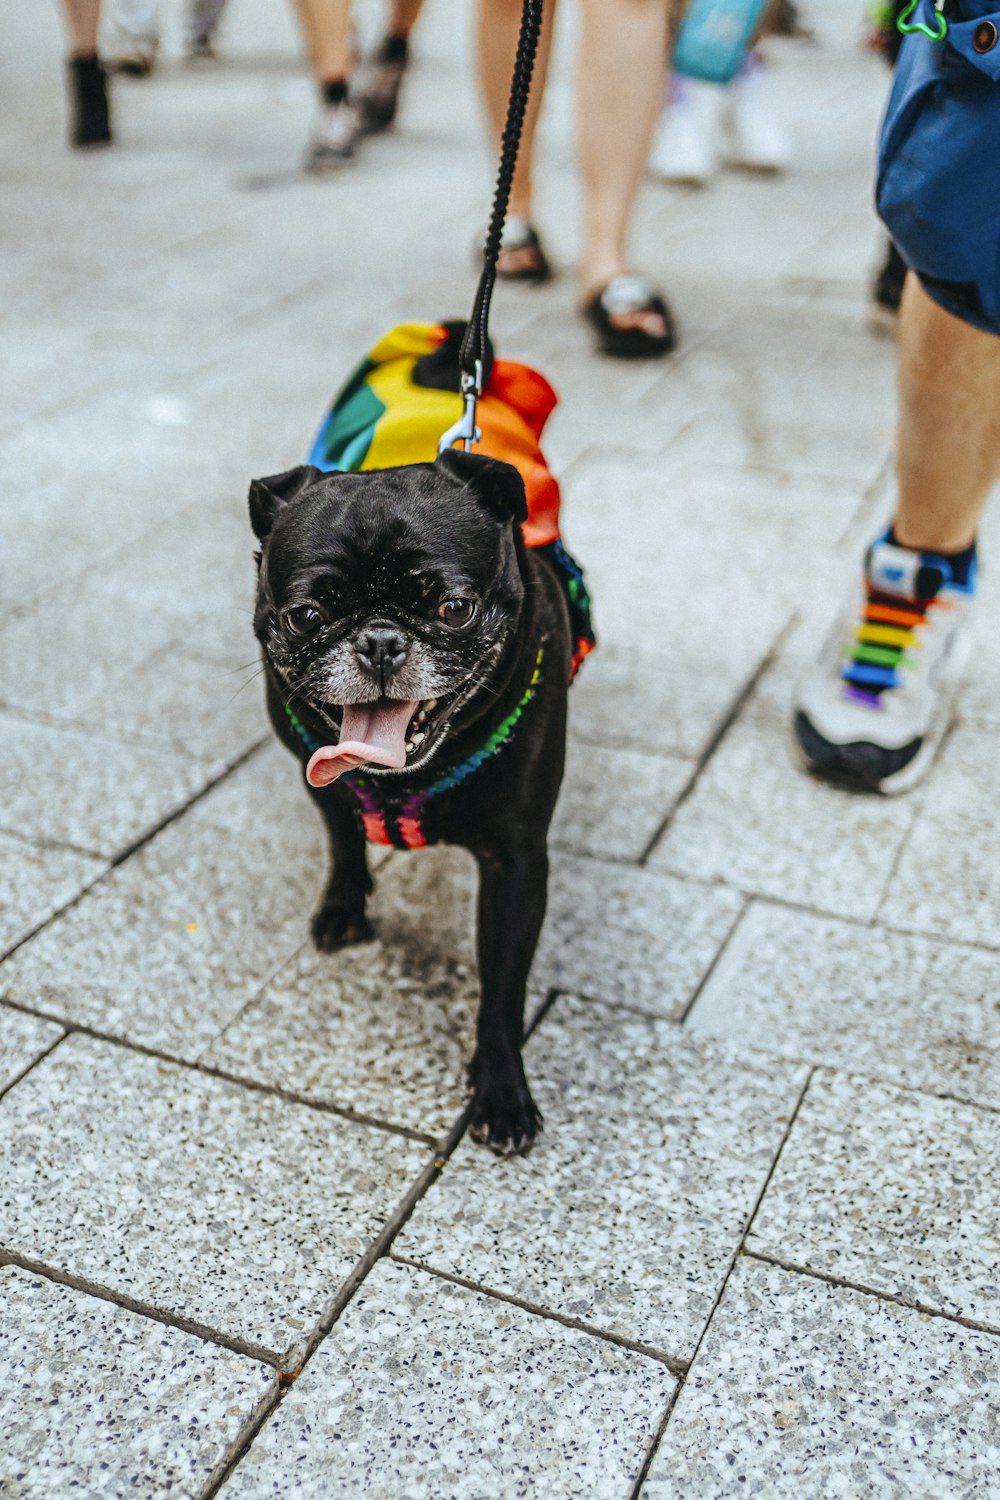 a small black dog wearing a colorful harness